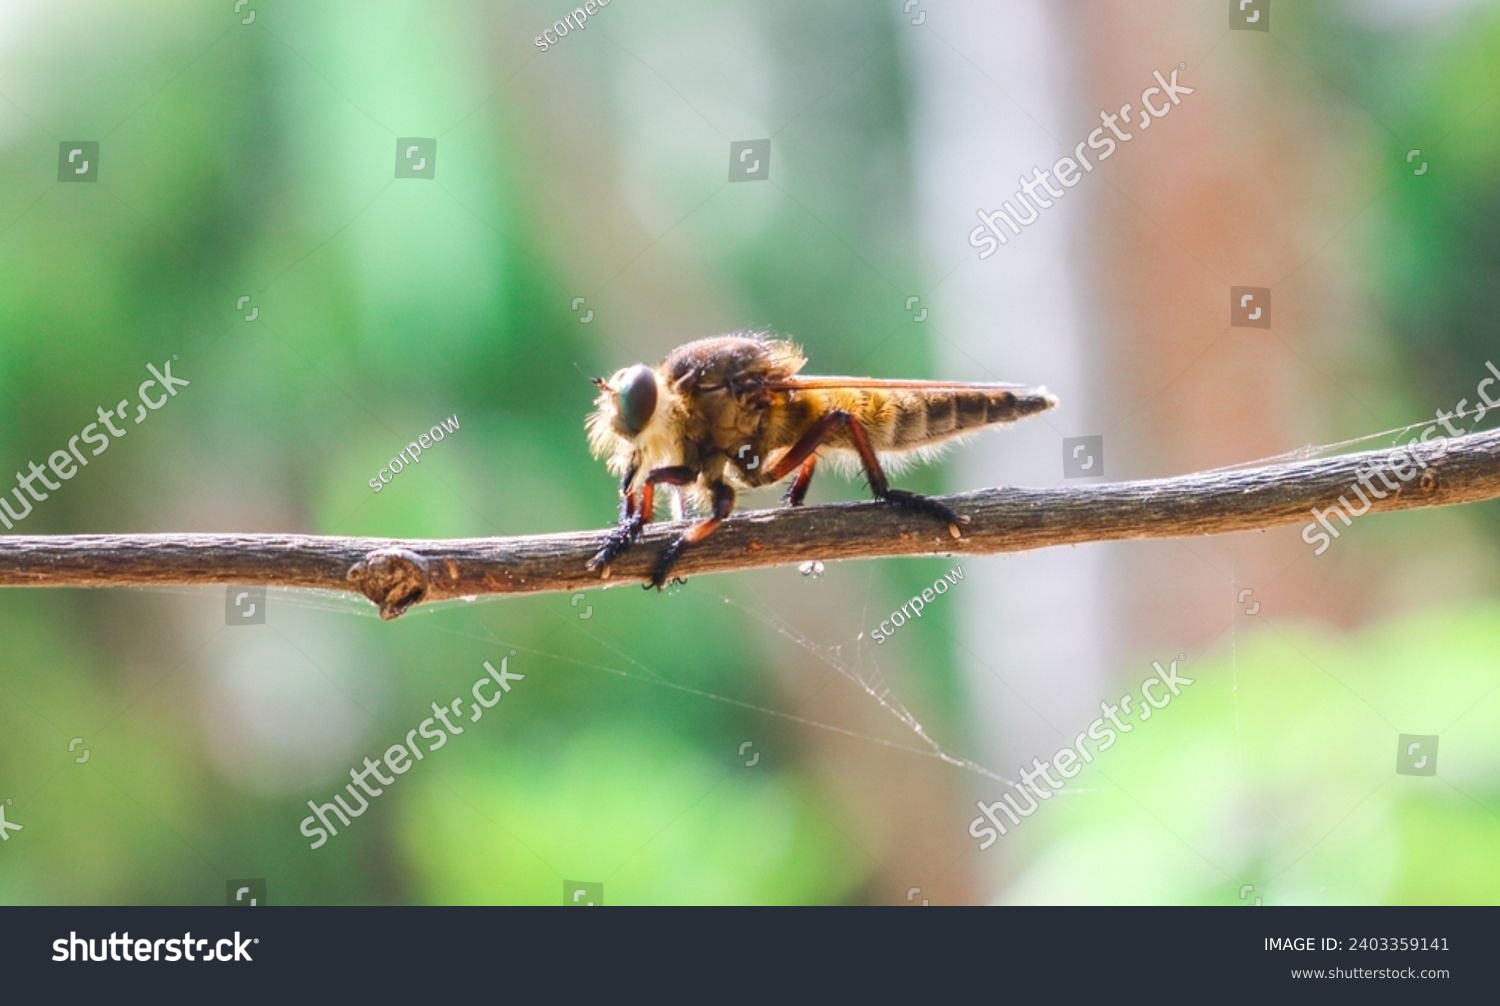 Promachus rufipes or Giant Robber Fly genus of flies also known as the red-footed cannibalfly or bee panther, is a fierce little predator. Close up Robber Fly perched on a tree trunk #2403359141